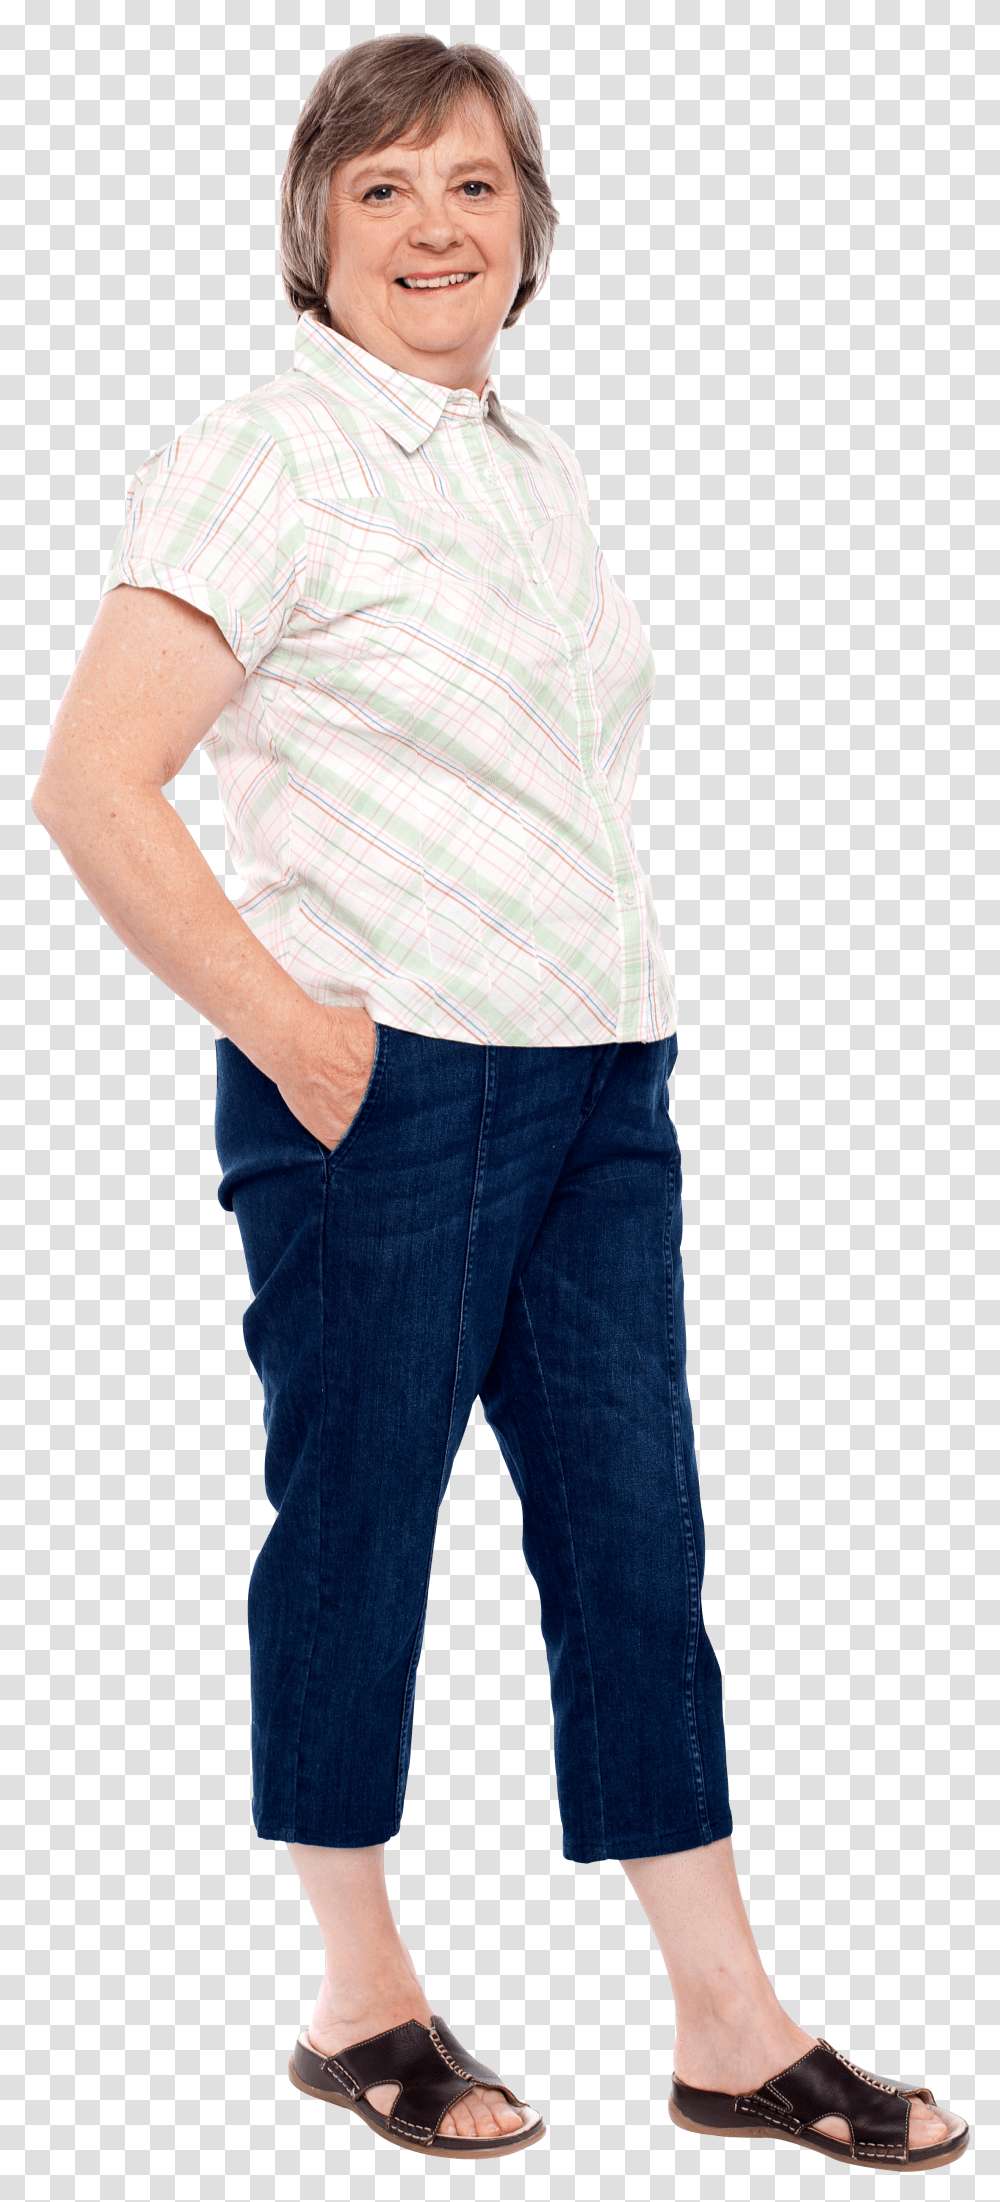 Grandmother Royalty Free Image Stock Photography Transparent Png